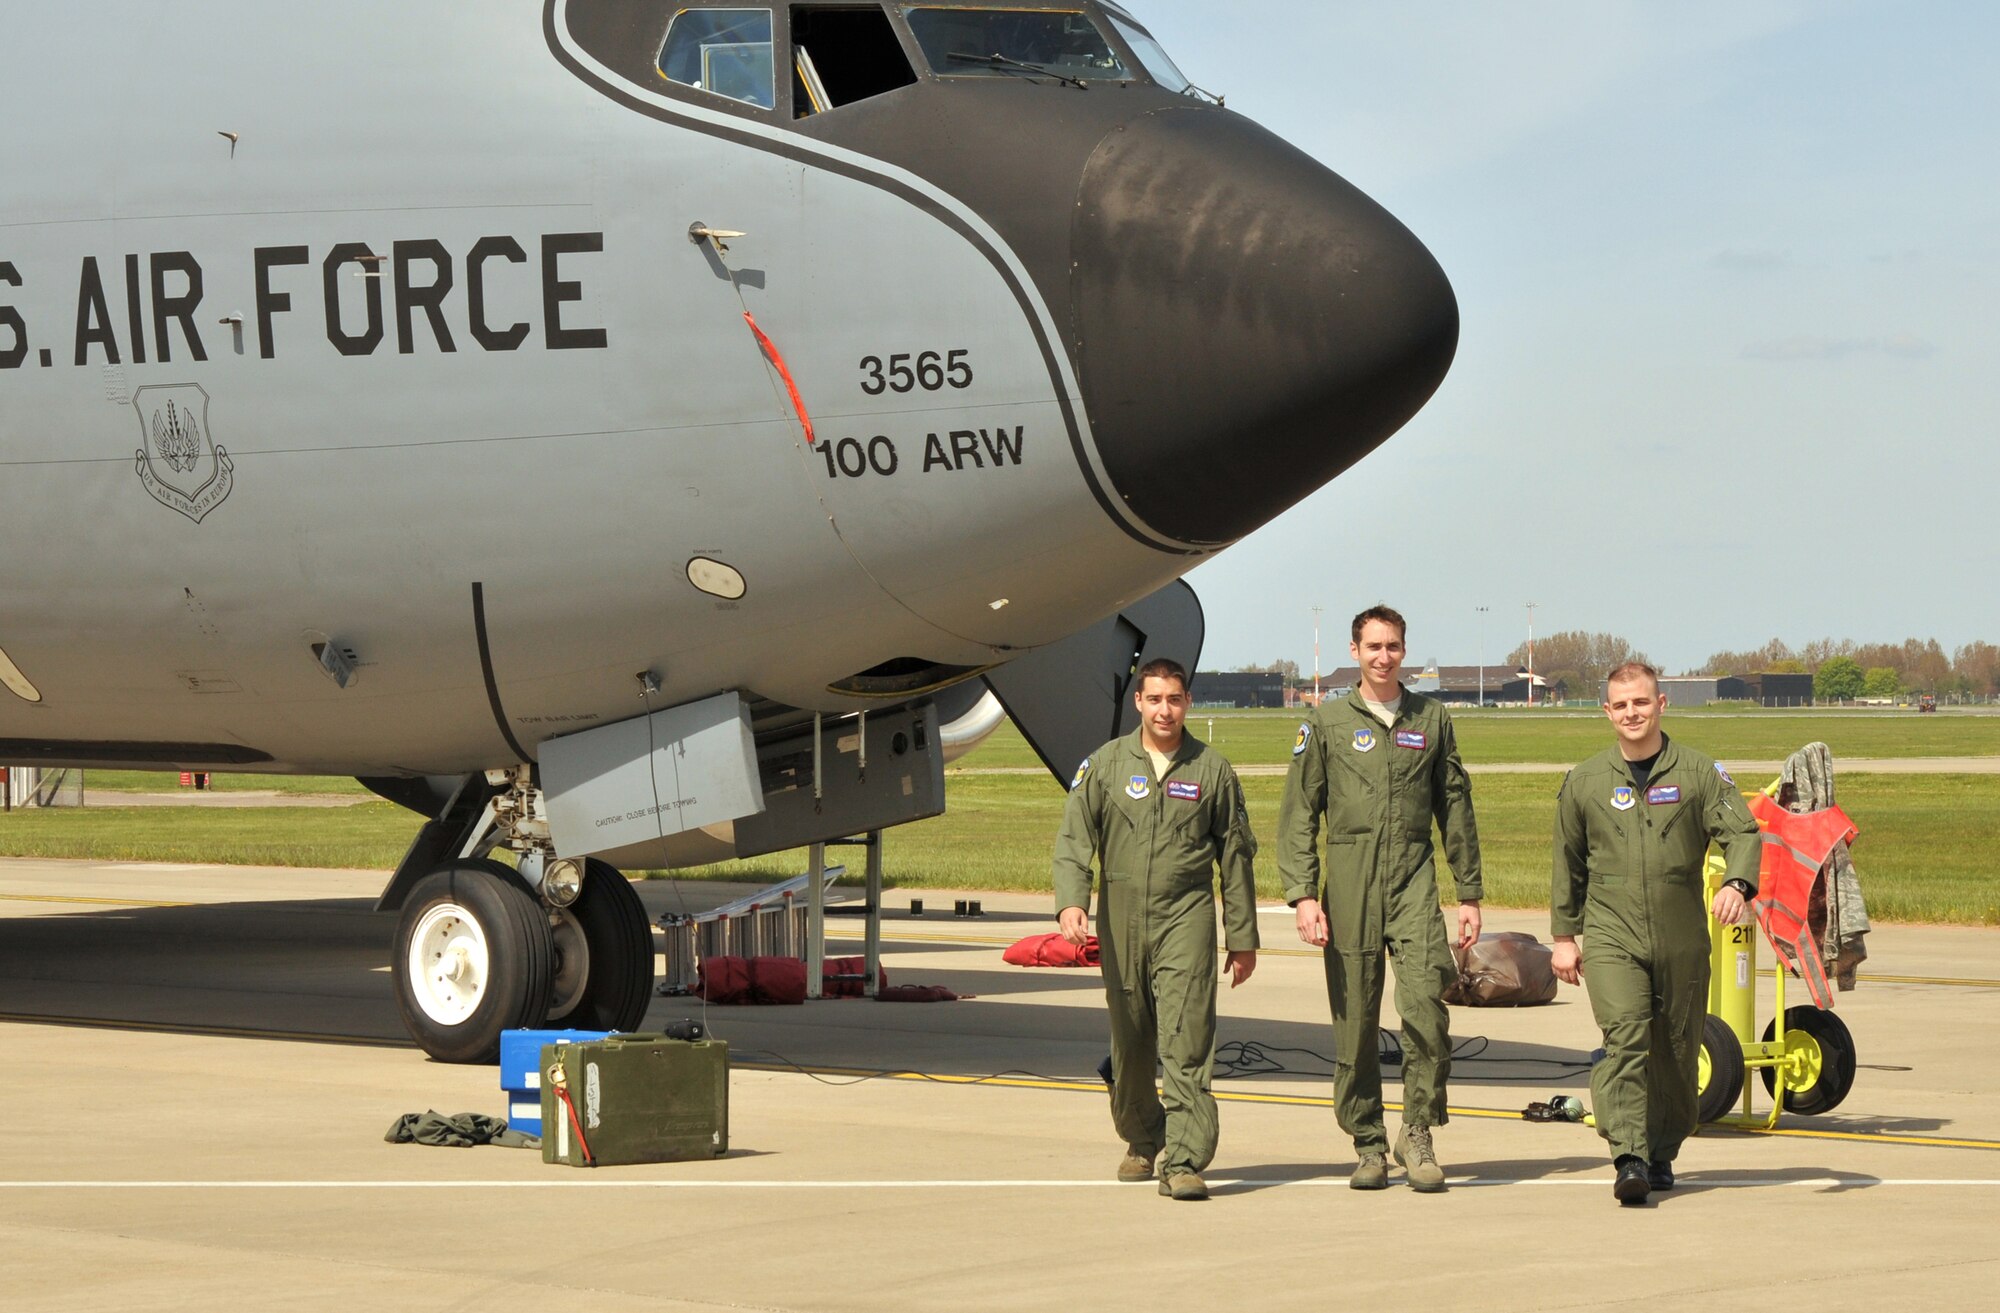 RAF MILDENHALL, England - The 351st Air Refueling Squadron crew of the April 27 Quid 20 mission disembark their aircraft on the RAF Mildenhall flightline. Capt. Jonathan Uhler, aircraft commander, 1st Lt. Matthew Greenspan, pilot, and Senior Airman Neil Patras, boom operator, were all interviewed by a local television crew after the flight. (U.S. Air Force photo/Tech. Sgt. Kevin Wallace)